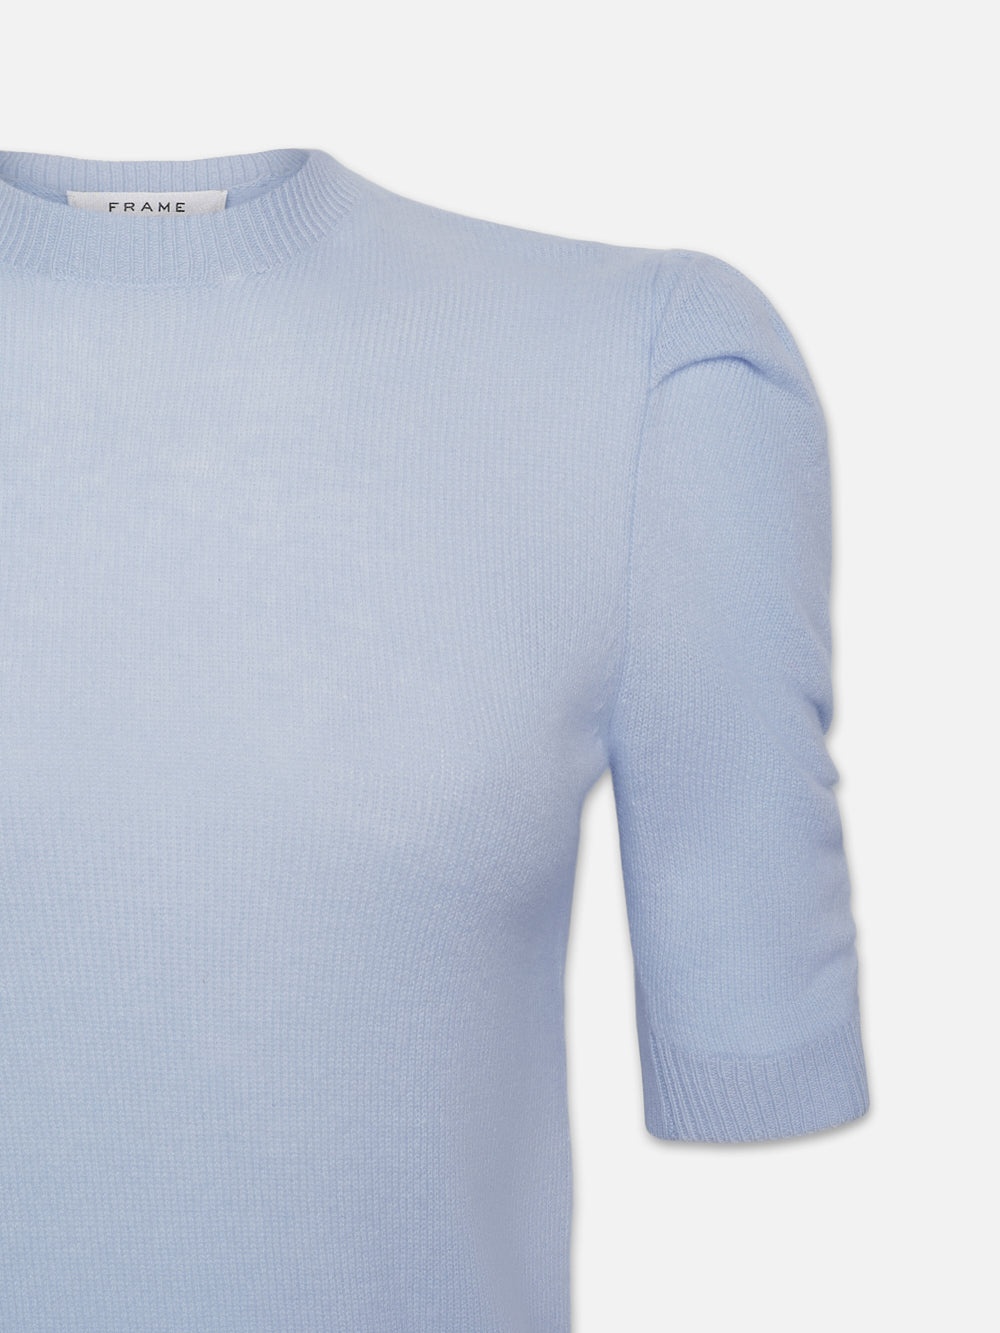 Ruched Sleeve Cashmere Sweater in Light Blue - 3